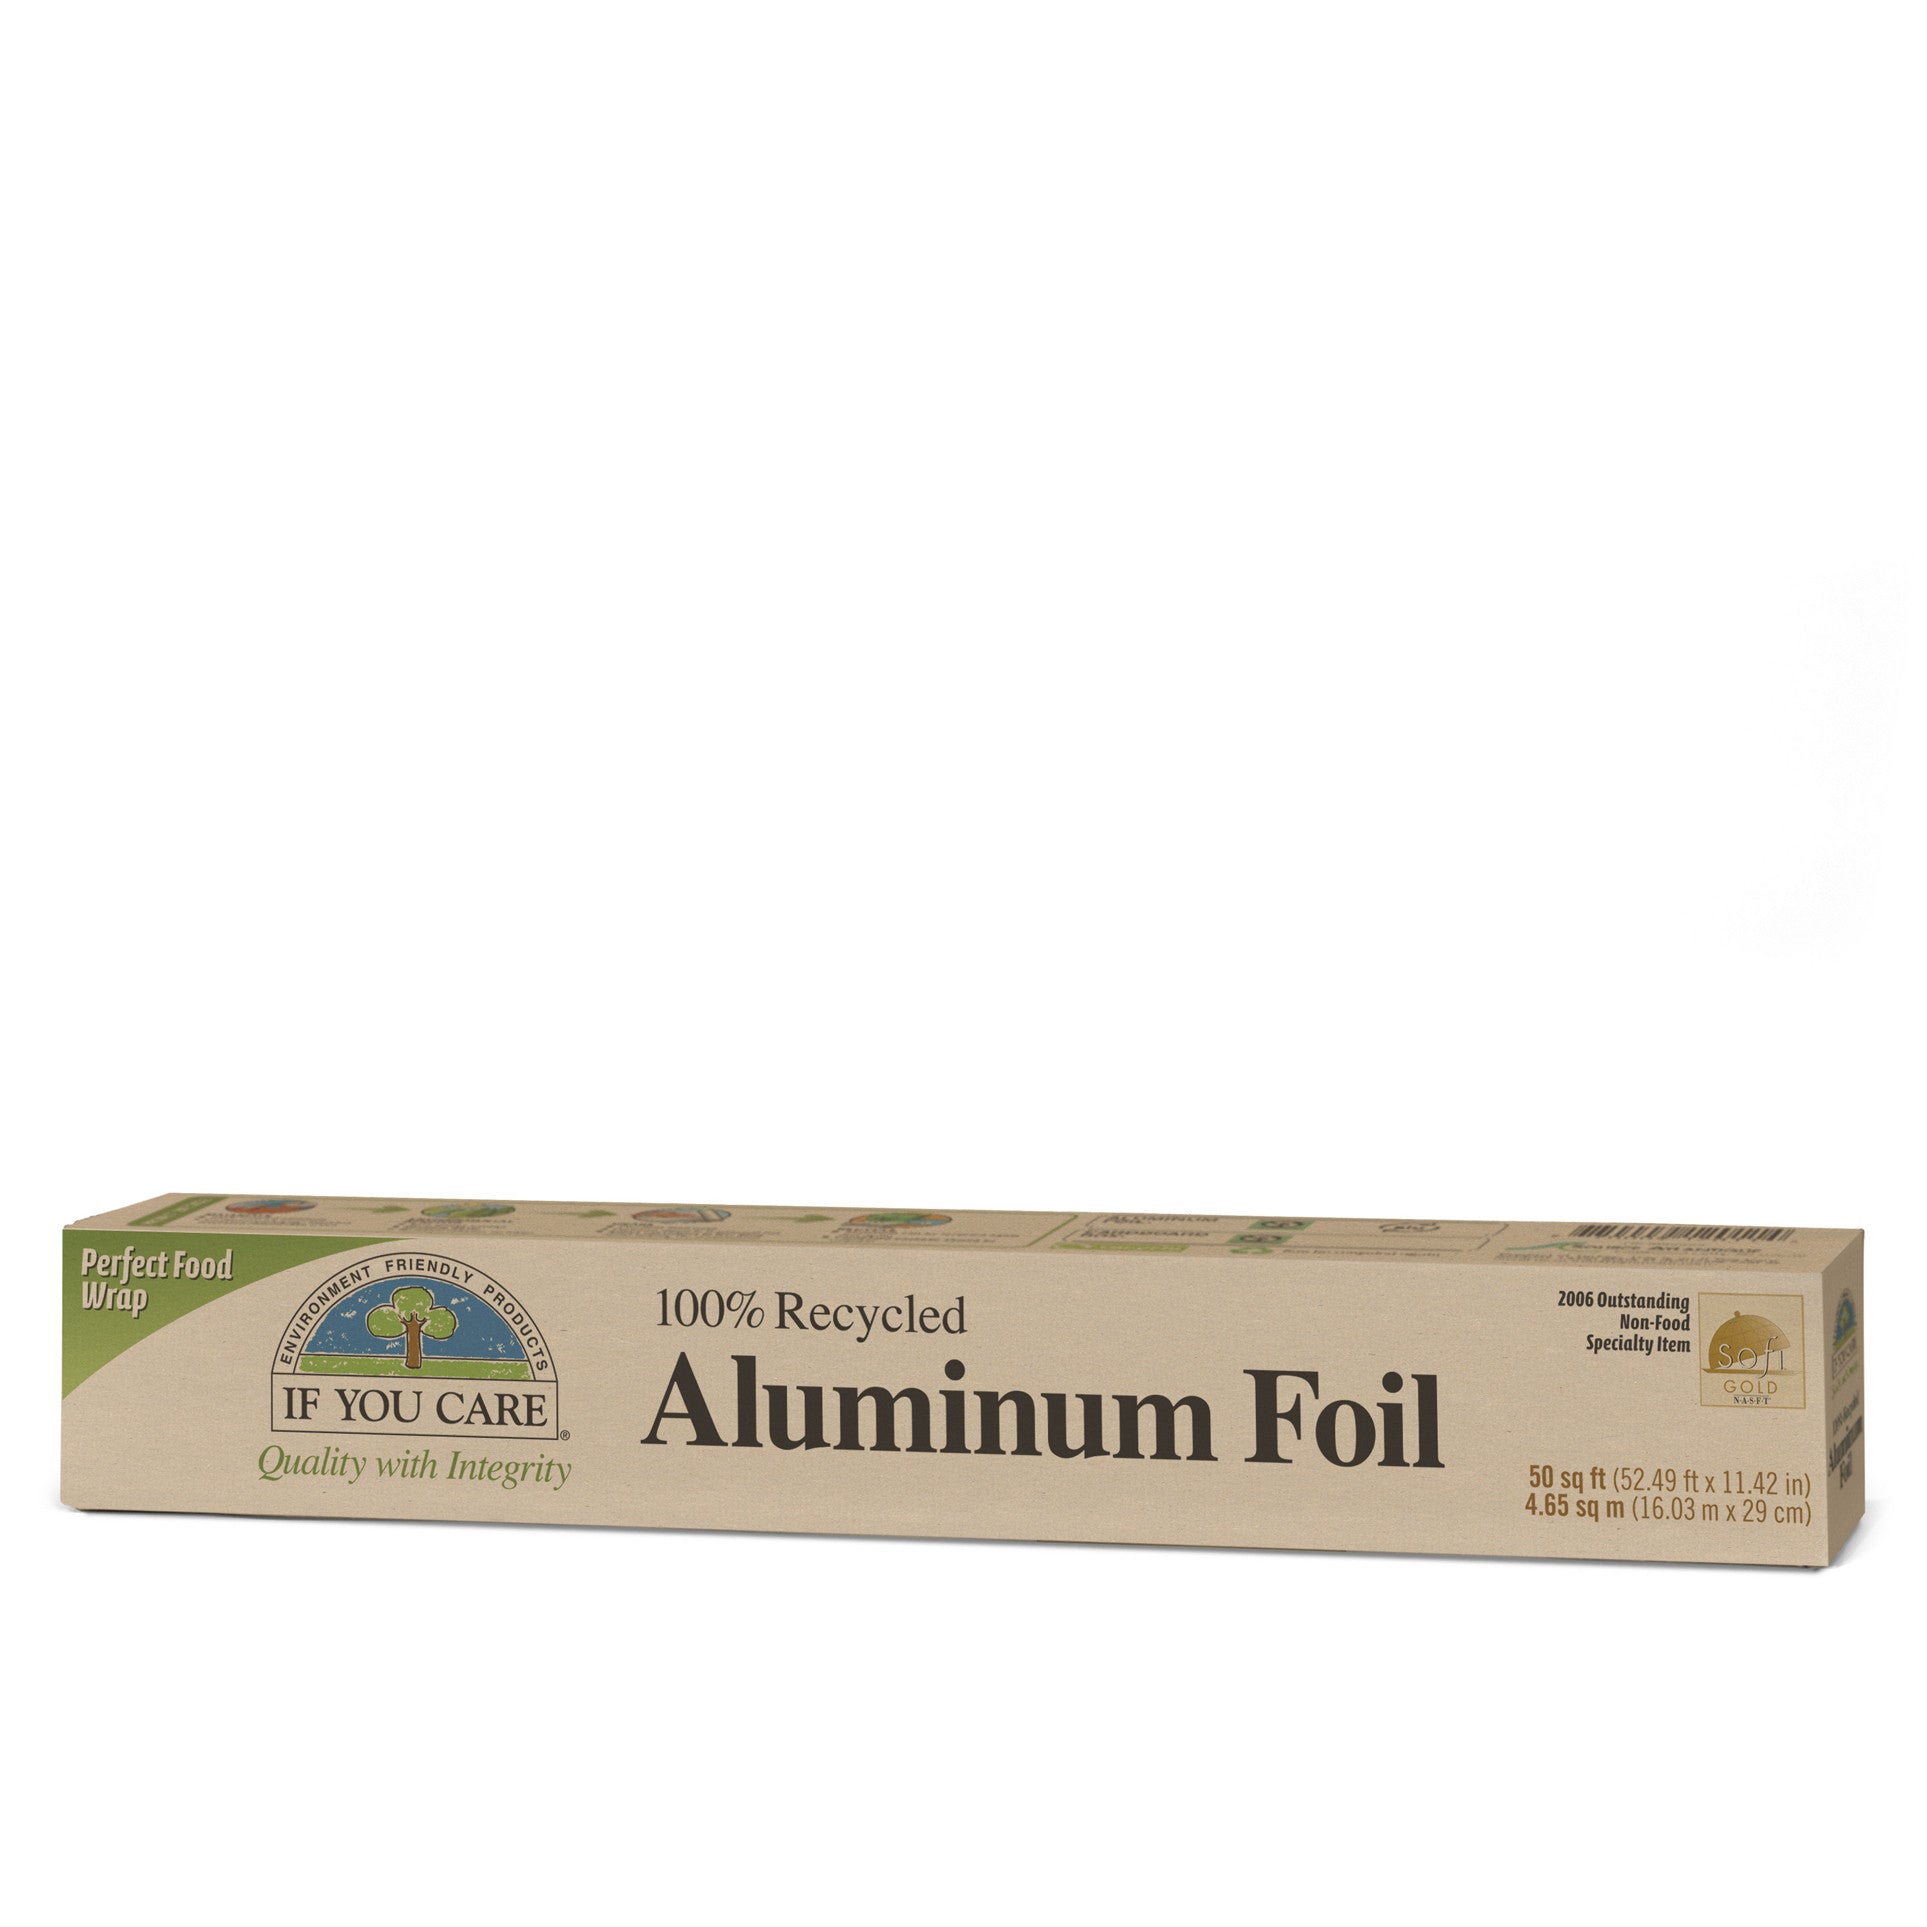 If You Care - Aluminum Foil 100% recycled